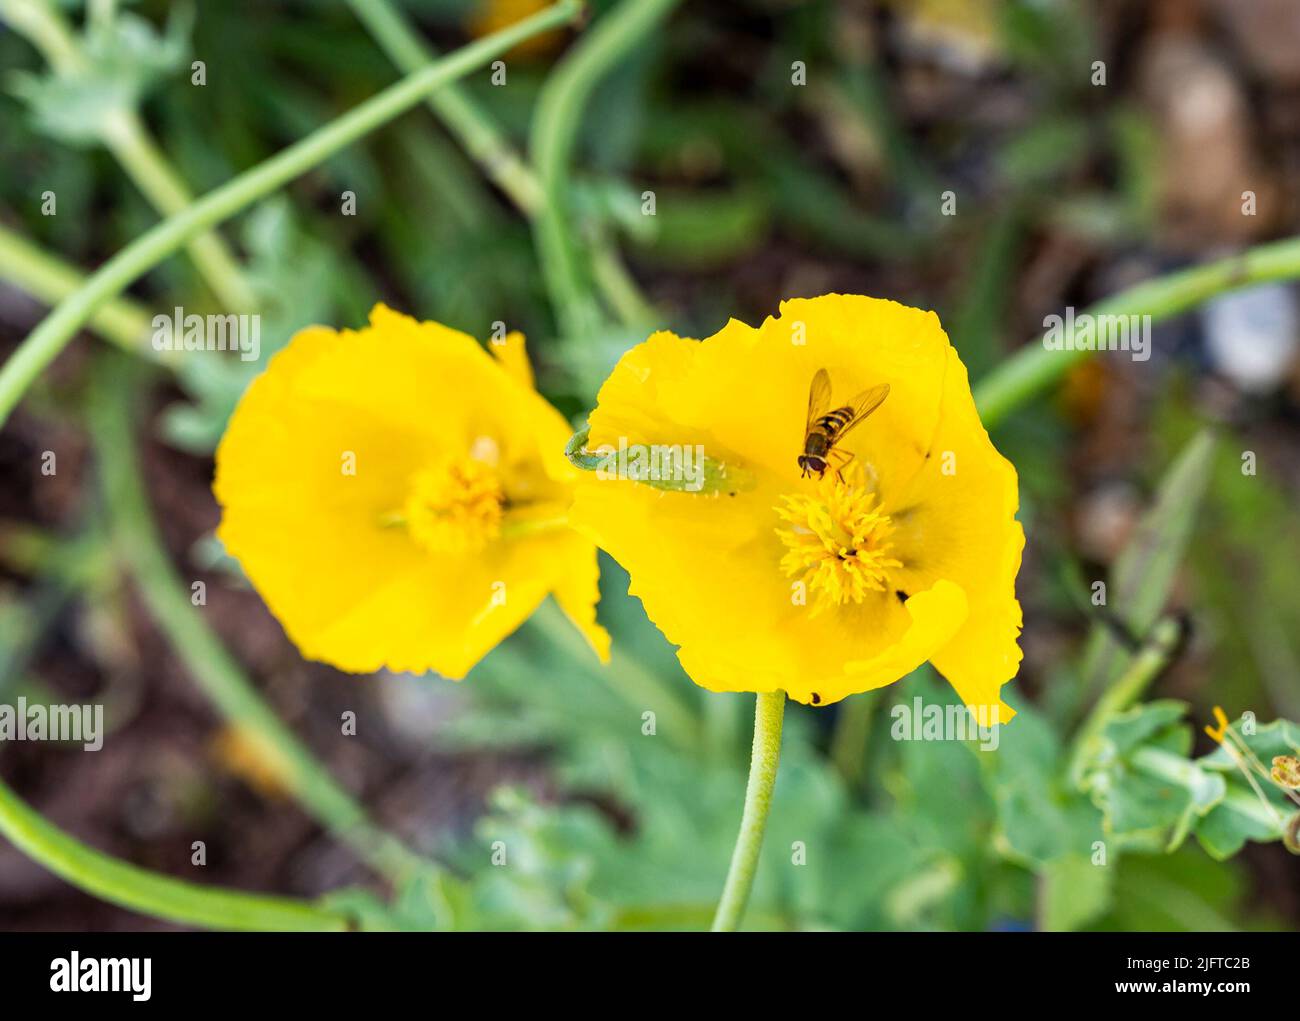 Cuckmere Haven & Seaford East Sussex England UK - Yellow horned poppy ( Glaucium flavum)  flowers with a bee Stock Photo